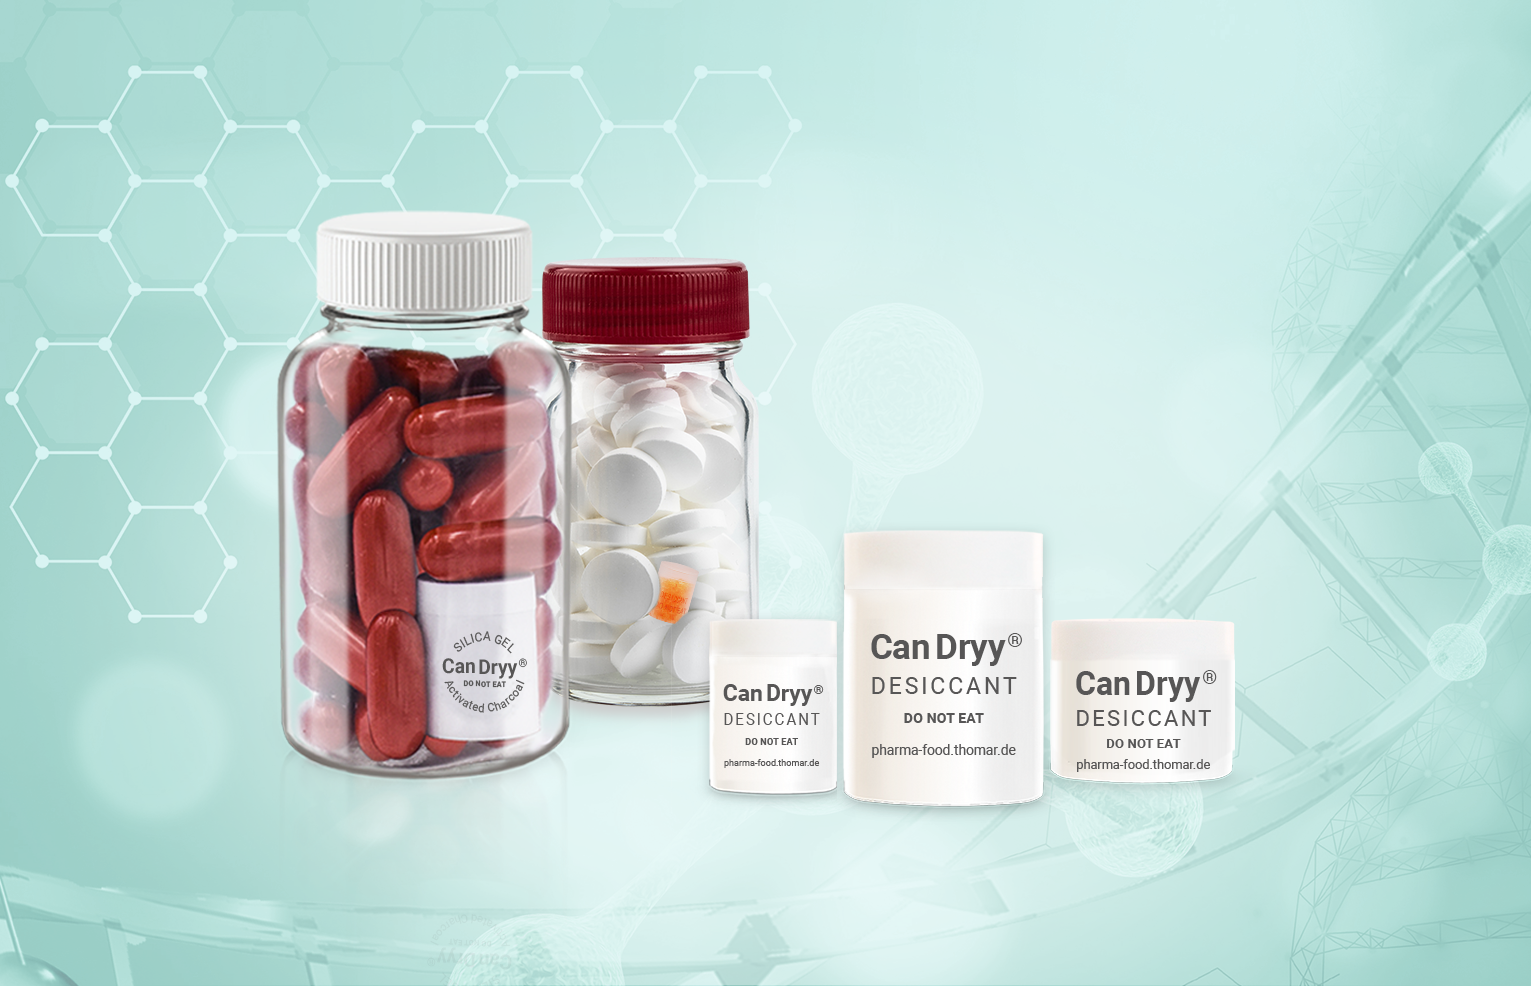 CanDryy desiccant canisters